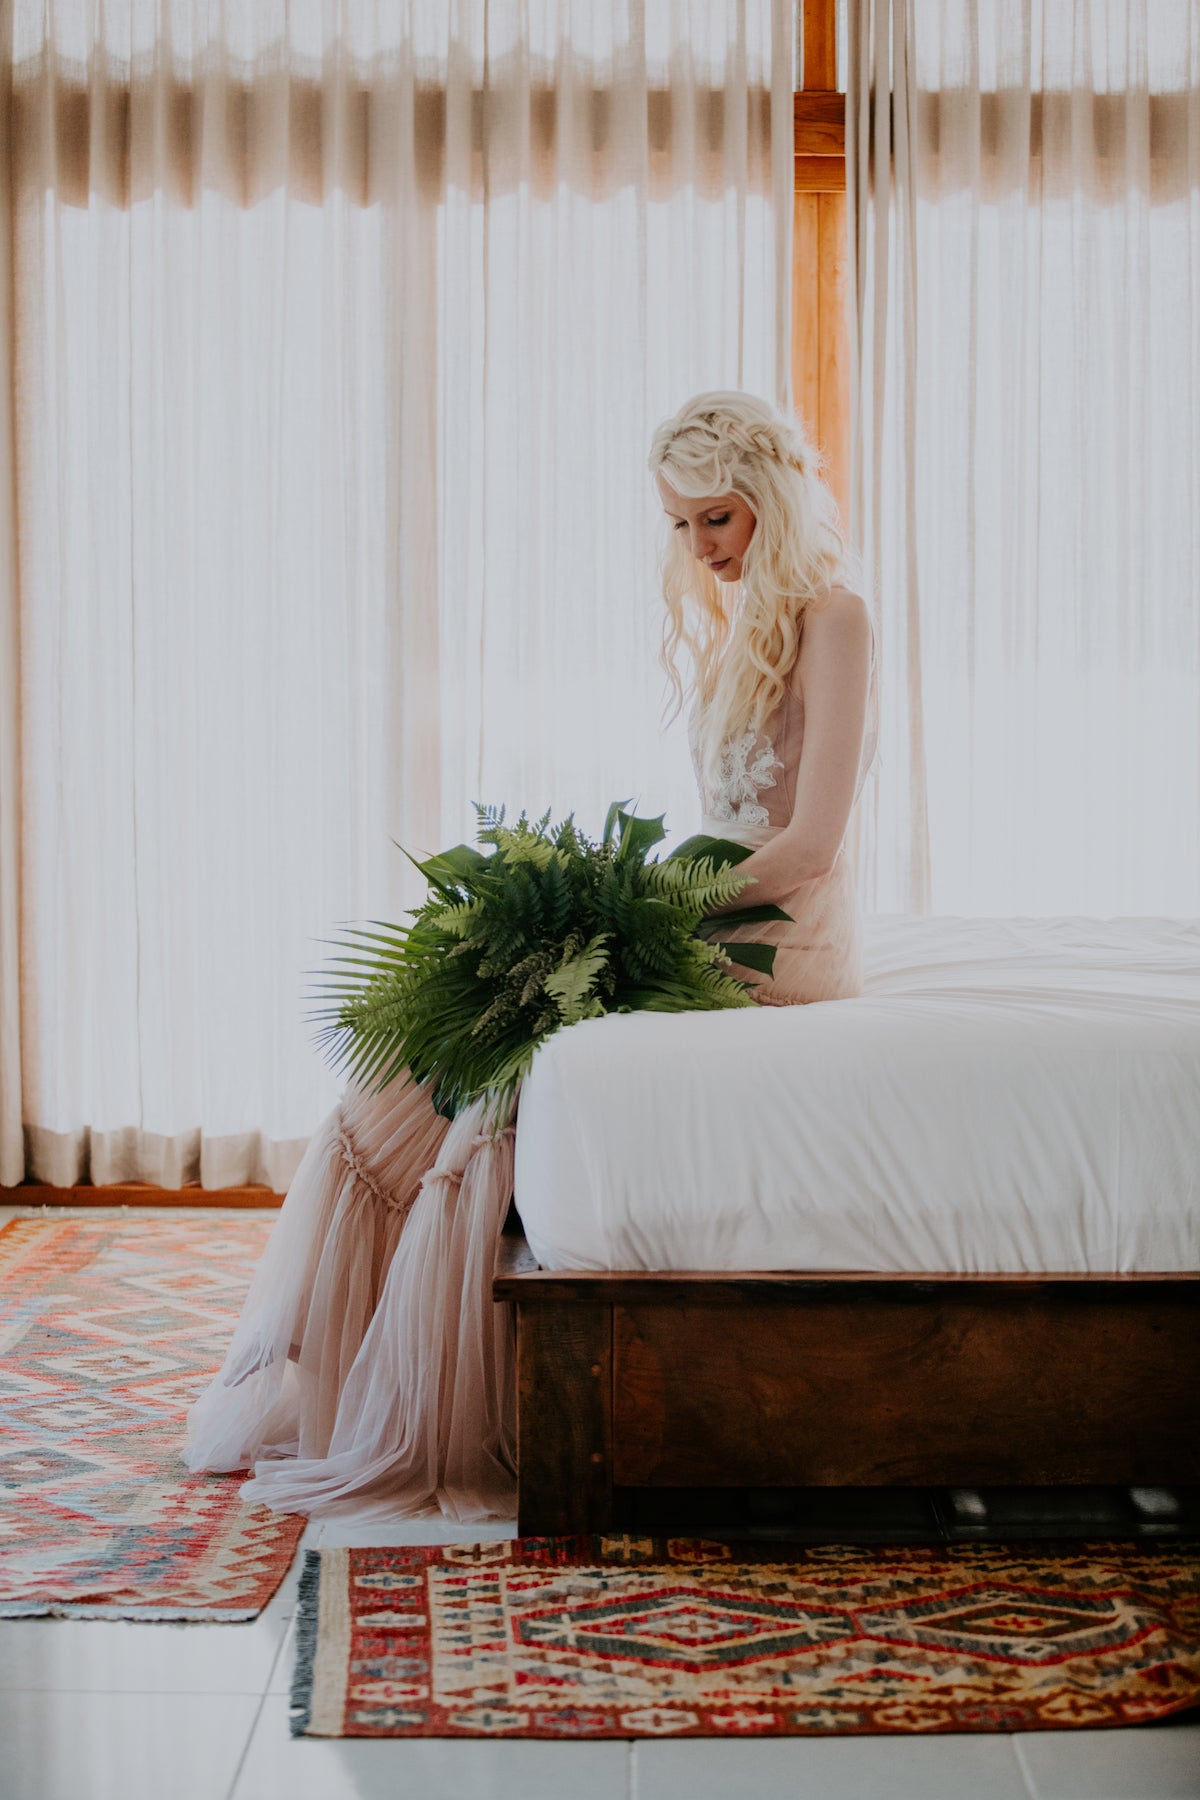 Bride sitting on bed in contemplation